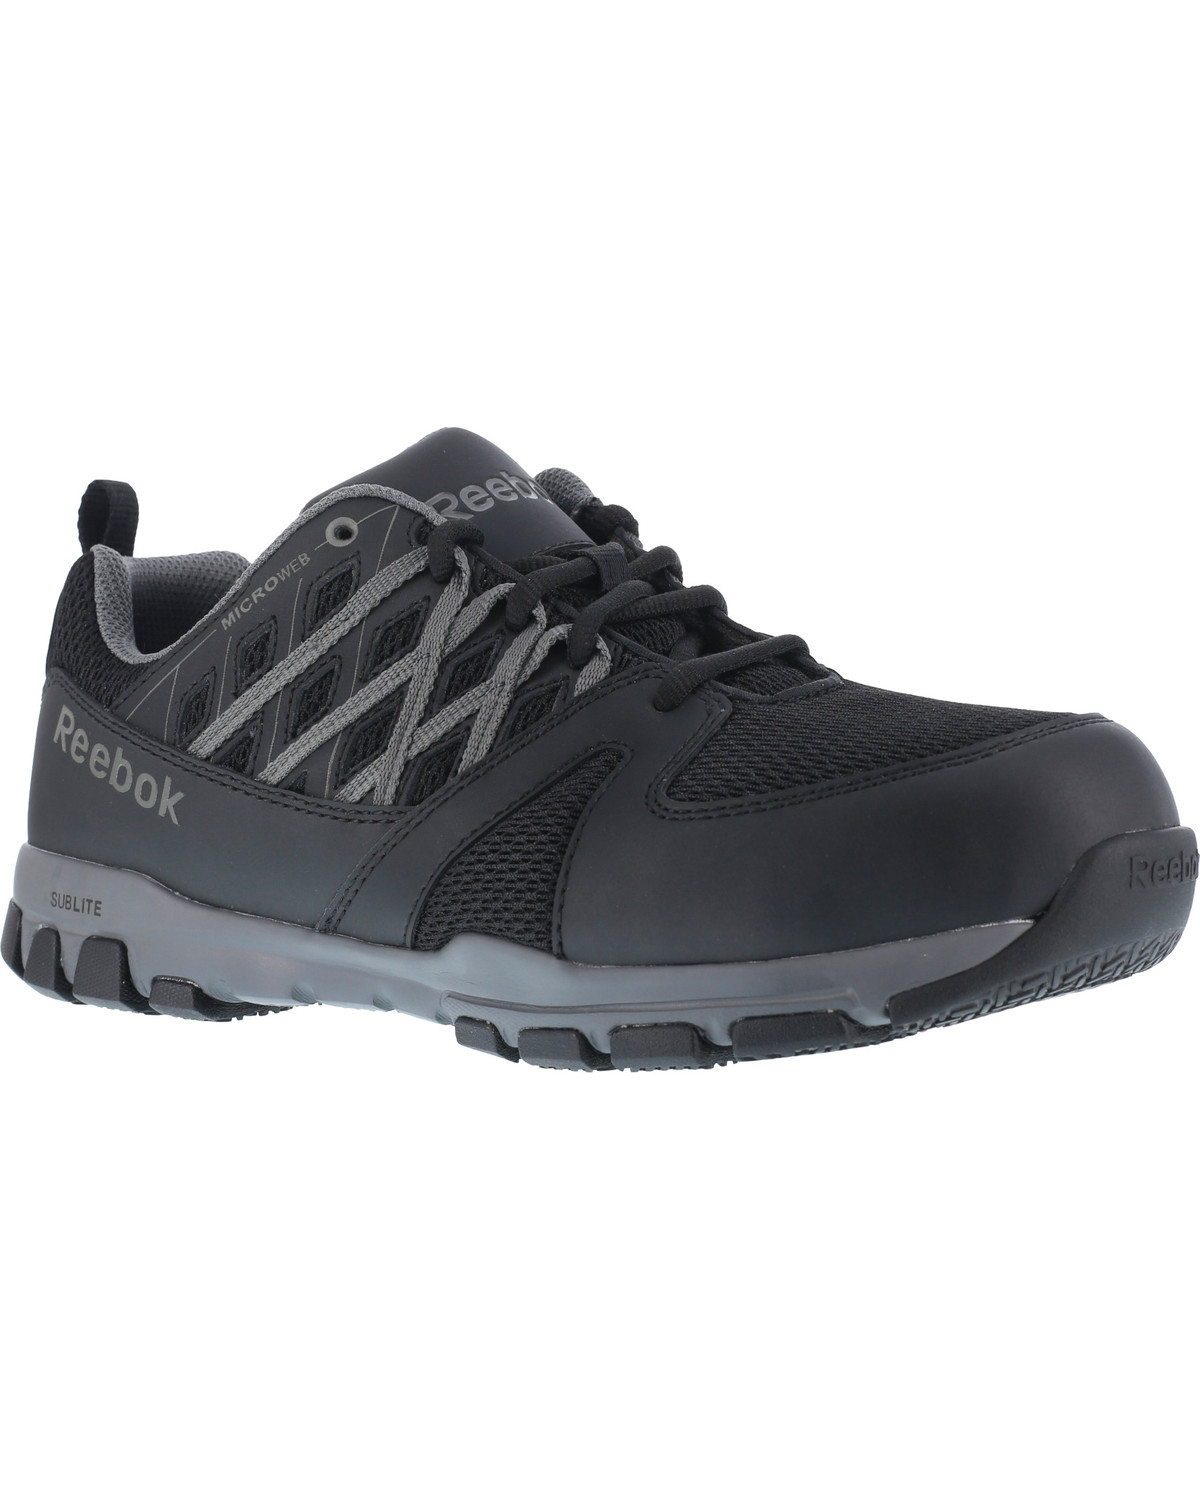 Reebok Men's Leather with MicroWeb Athletic Oxfords - Steel Toe